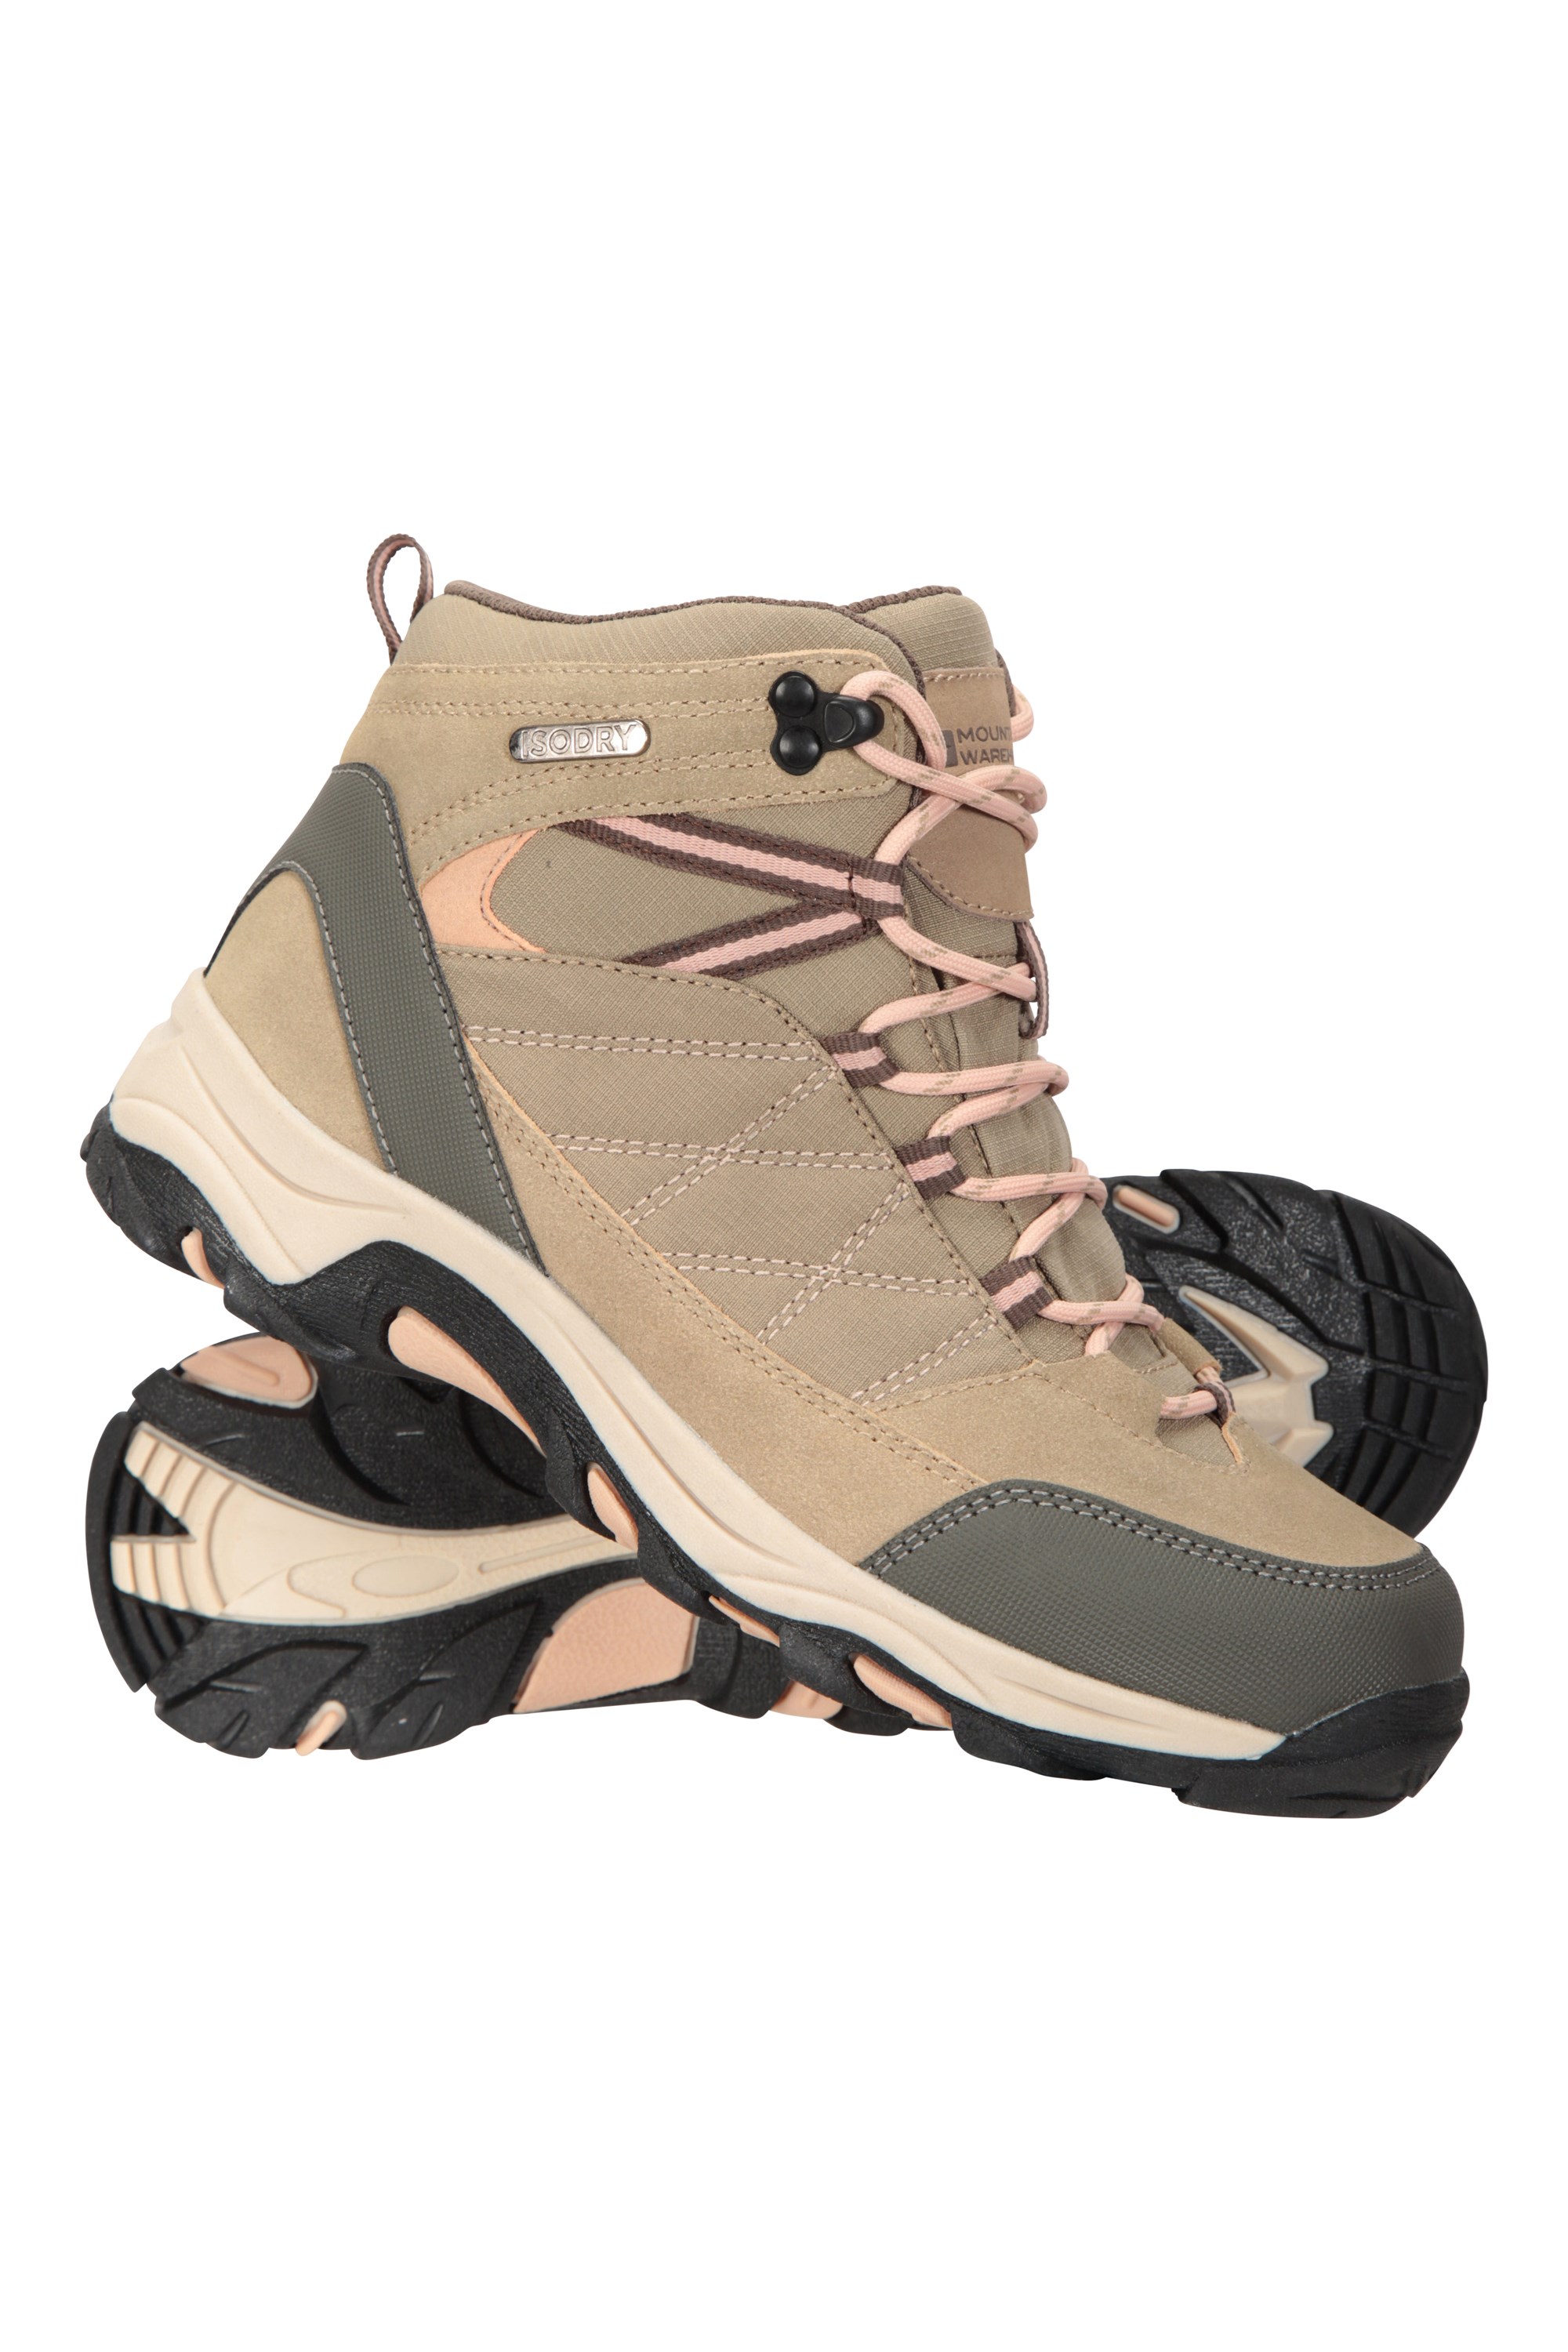 Ladies Shoes Mountain Warehouse Rapid Womens Waterproof Hiking Boots